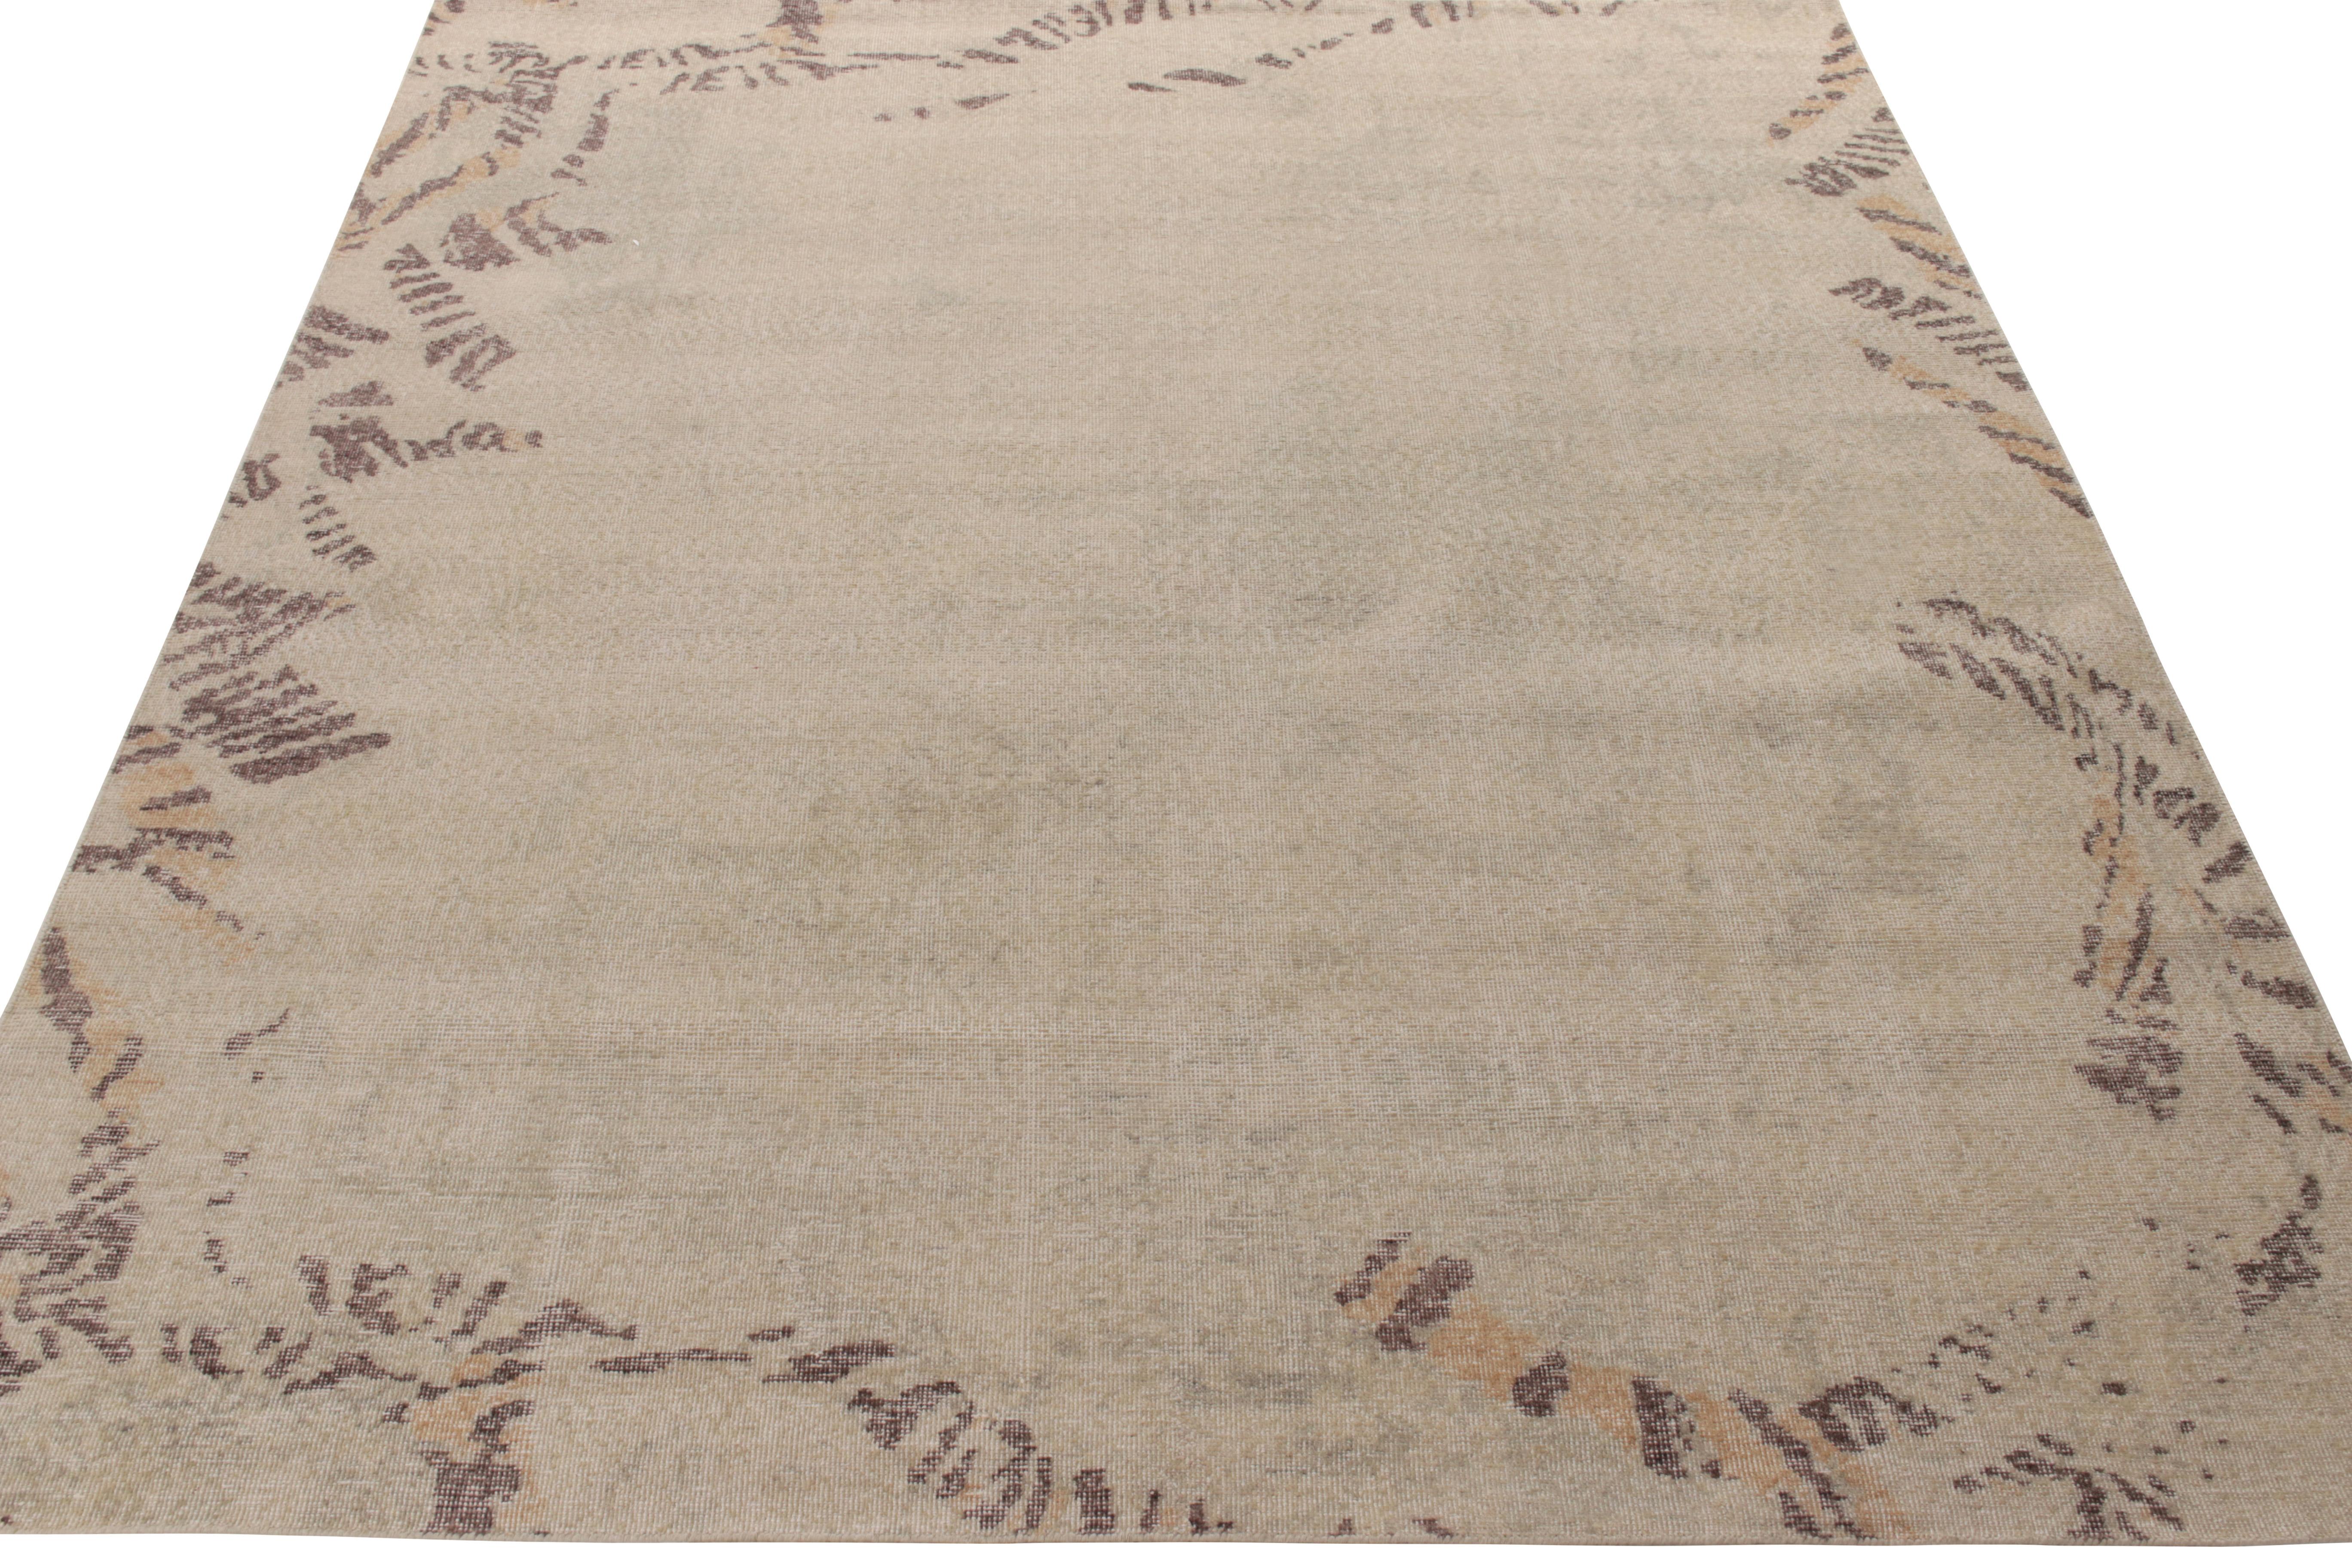 Hand-knotted in wool, an 8 x 10 drawing from Rug & Kilim’s Homage collection showcasing a subtle, muted pattern in cream, beige & brown colorways close to the edges yielding an open field leaving ample room for imagination. Connoisseurs may note the